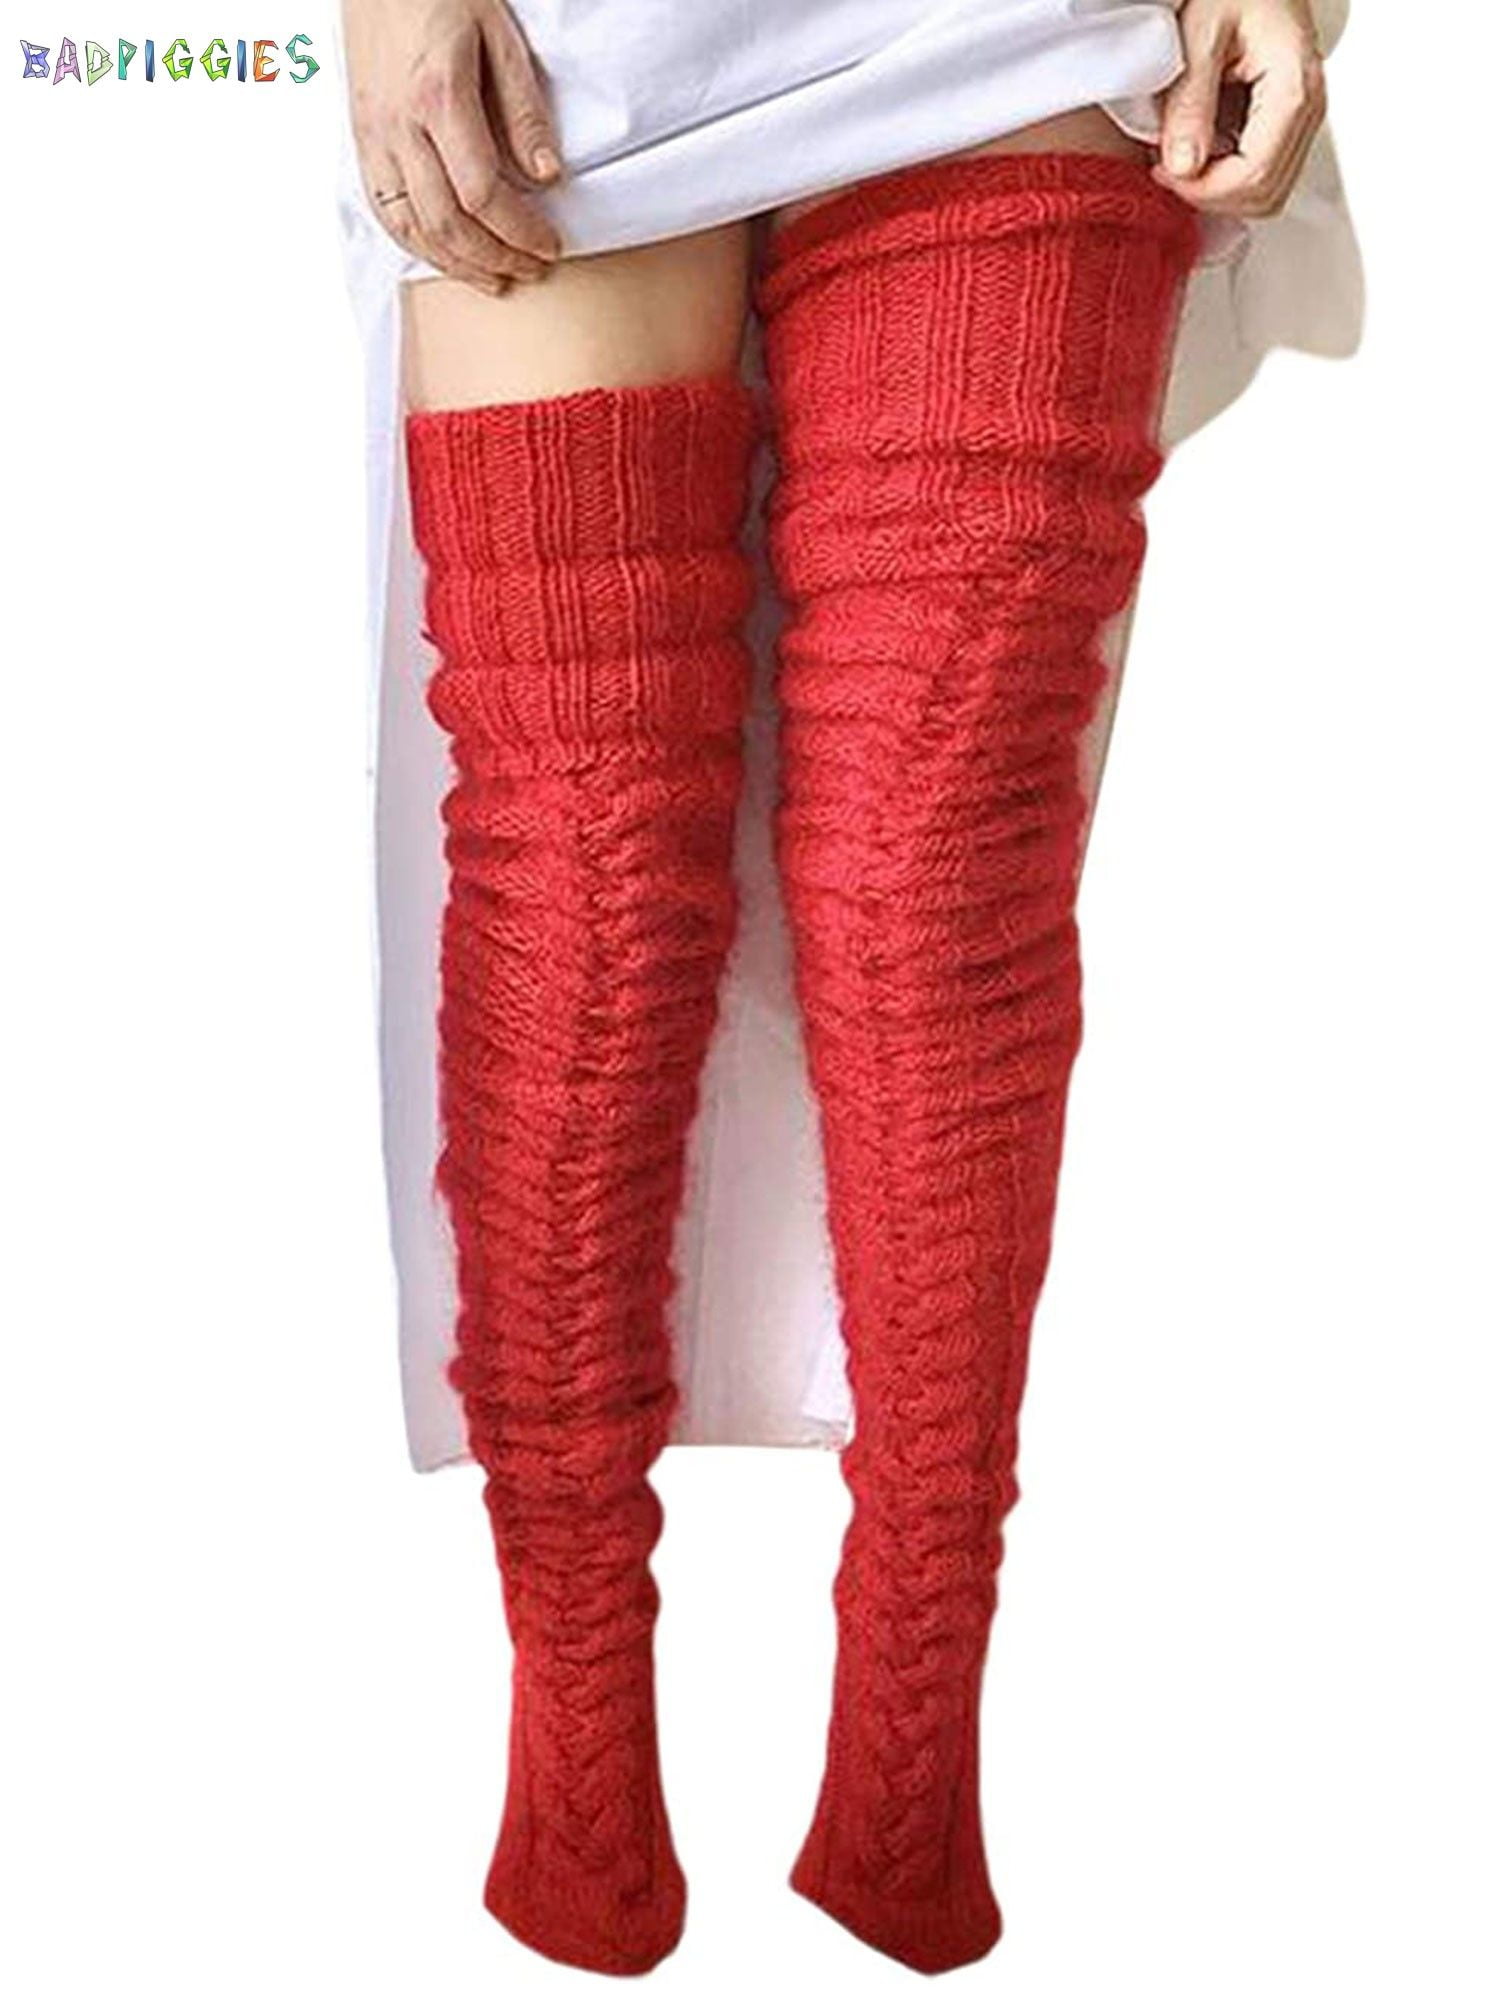 Wine Red Thigh High Socks Stockings Long Knitted Cotton Knee Warm Women UK 